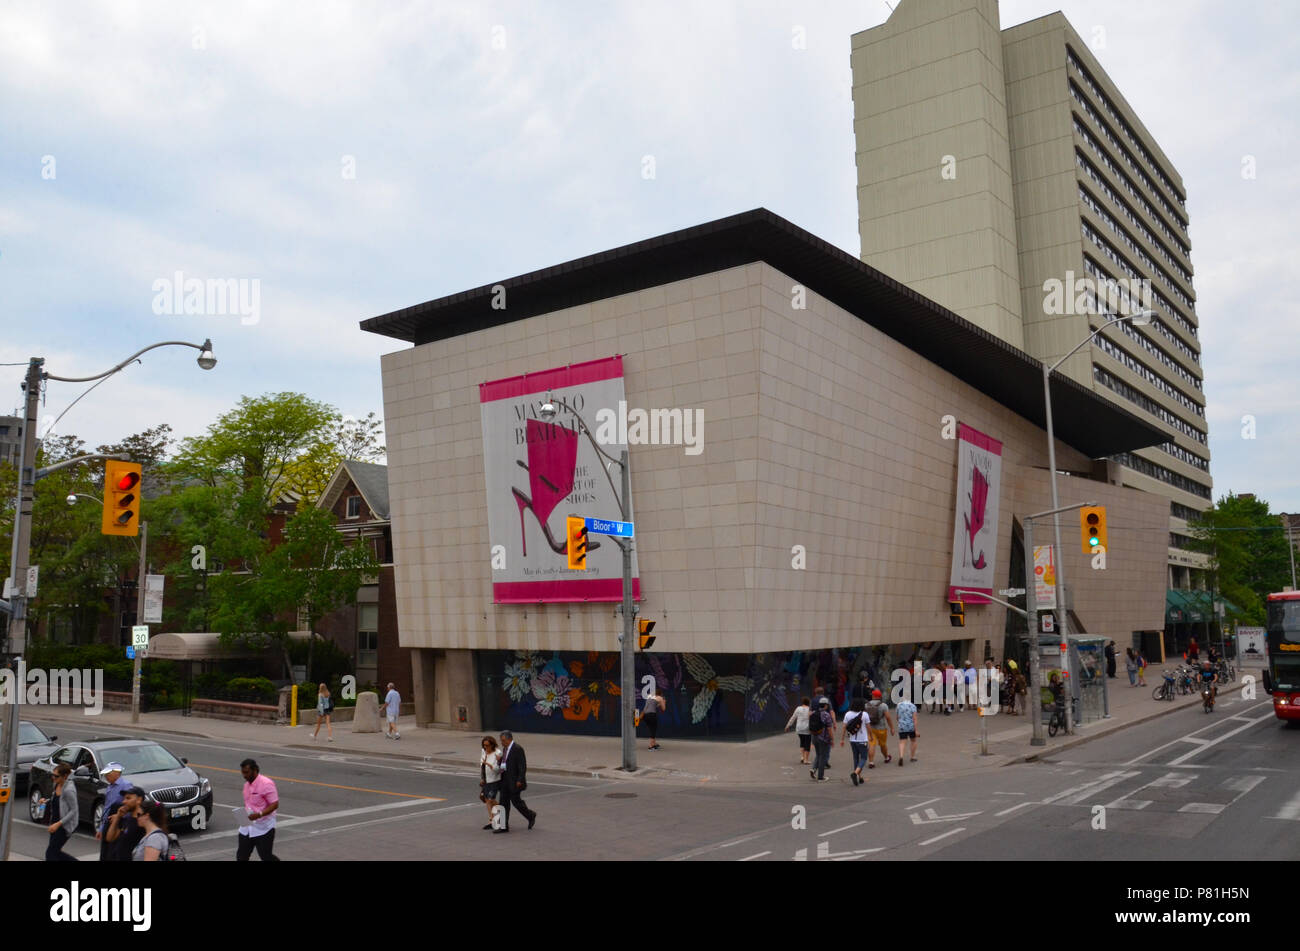 TORONTO, ON / CANADA - MAY 26, 2018: The Bata Museum, shown here, houses over a thousand shoes and related artifacts. Stock Photo